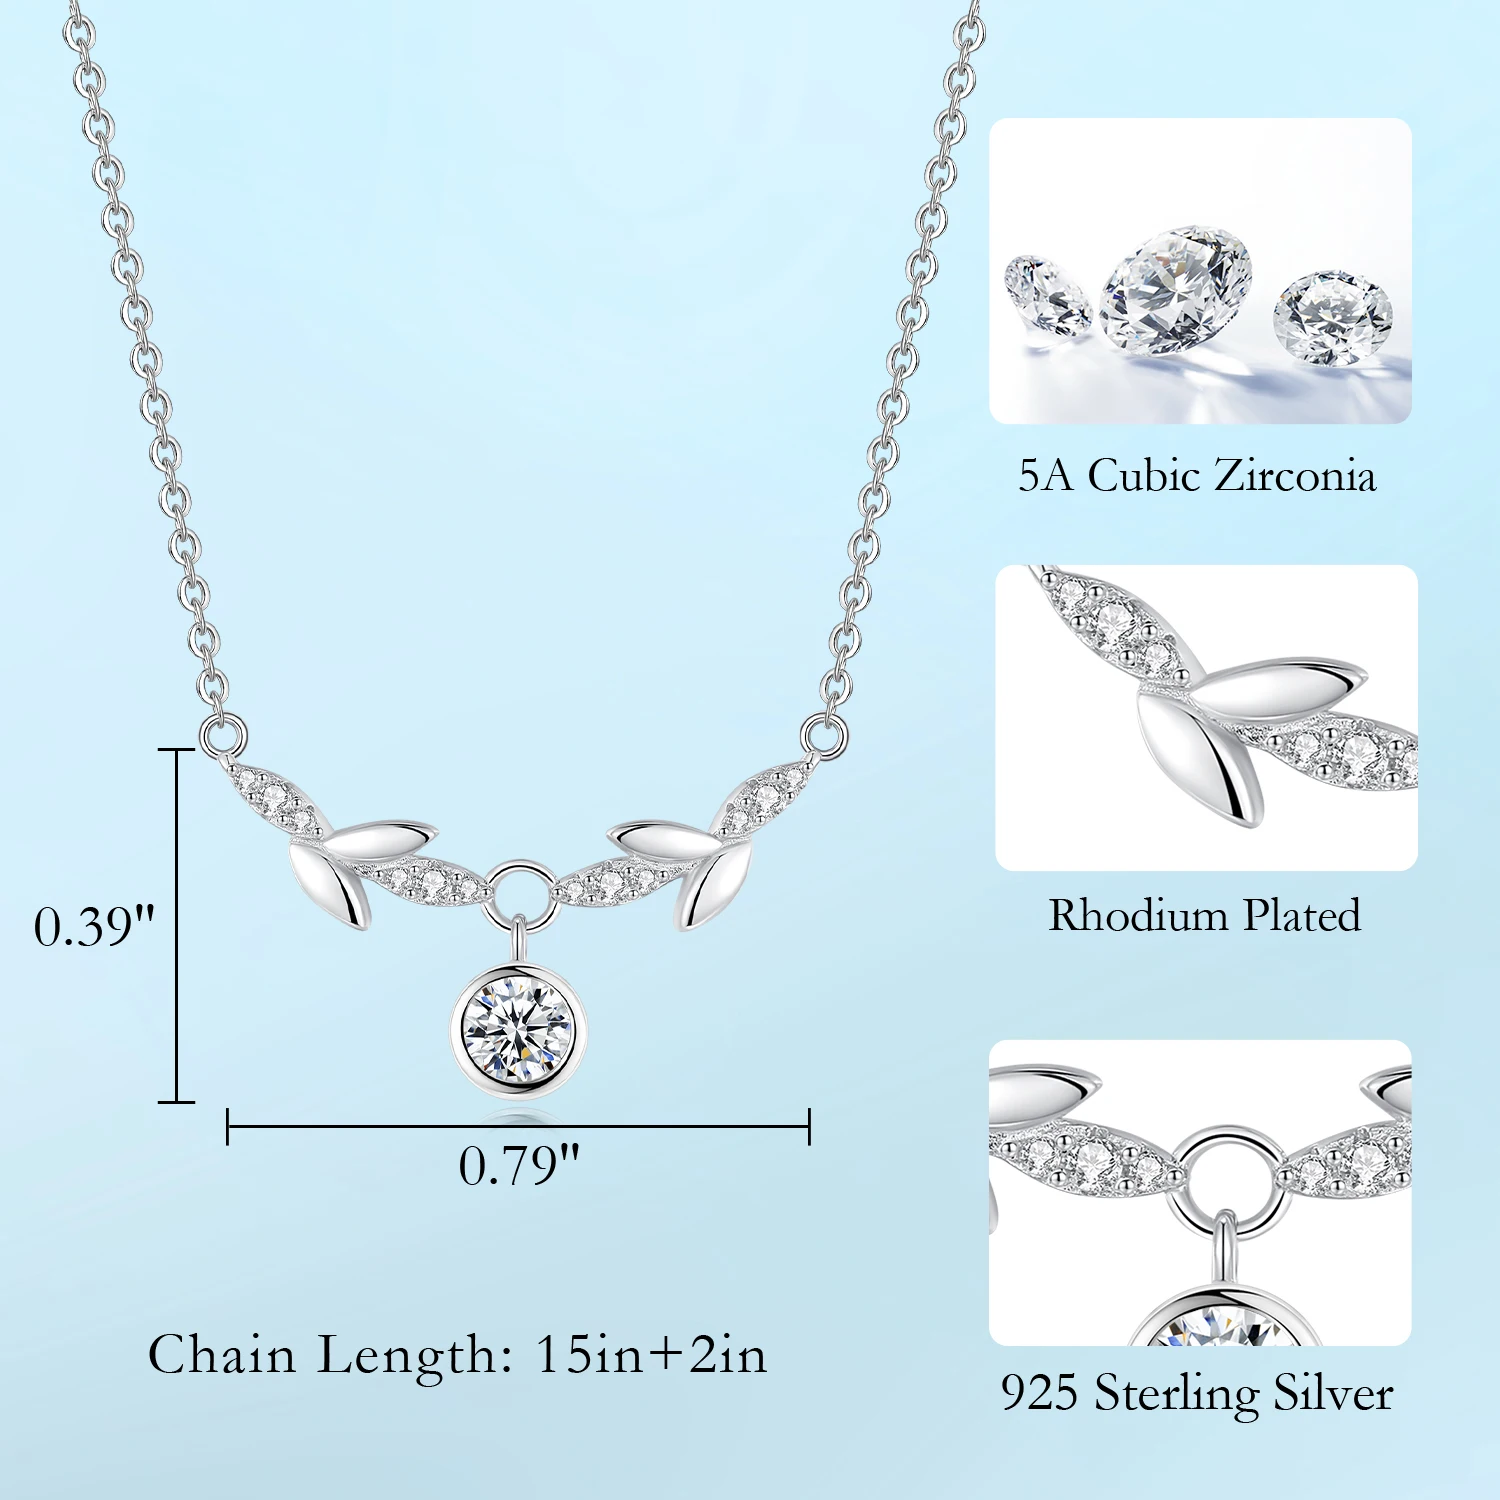 CDE CZYN004 Fine 925 Sterling Silver Jewelry Necklace Classic Zircon Pendant Rhodium Plated Women Leaf Pendant Necklace